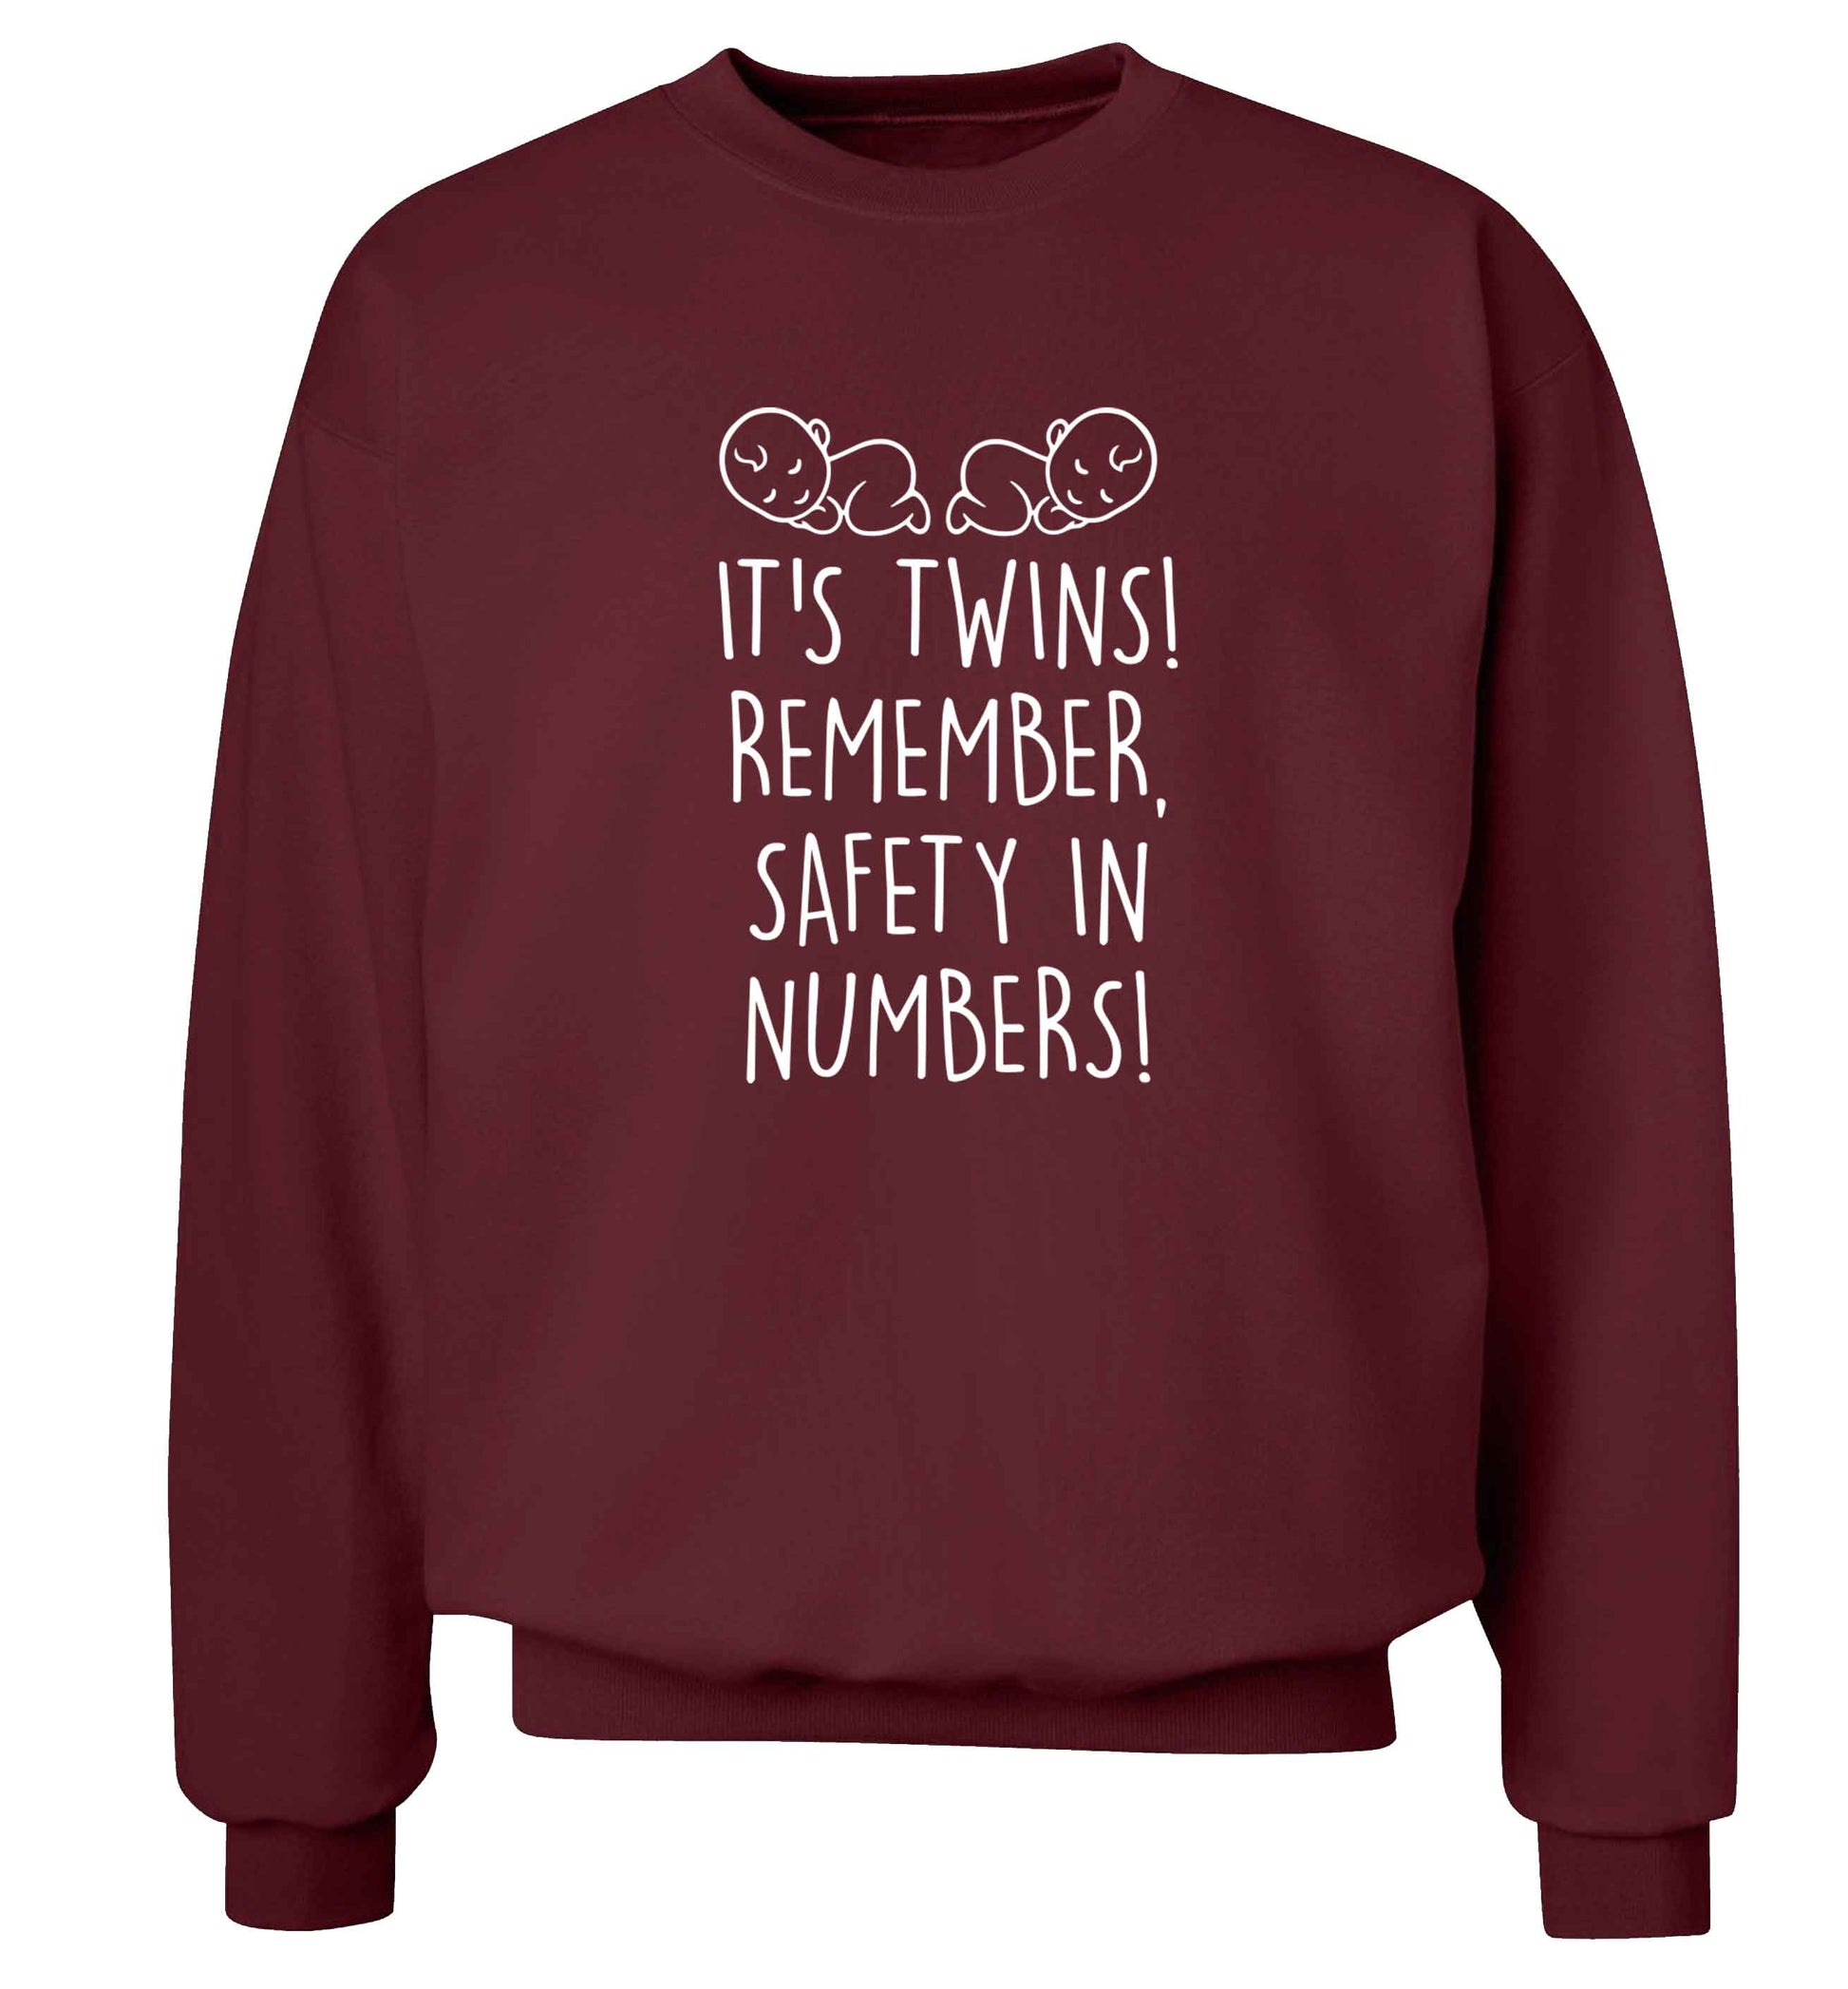 It's twins! Remember safety in numbers! adult's unisex maroon sweater 2XL